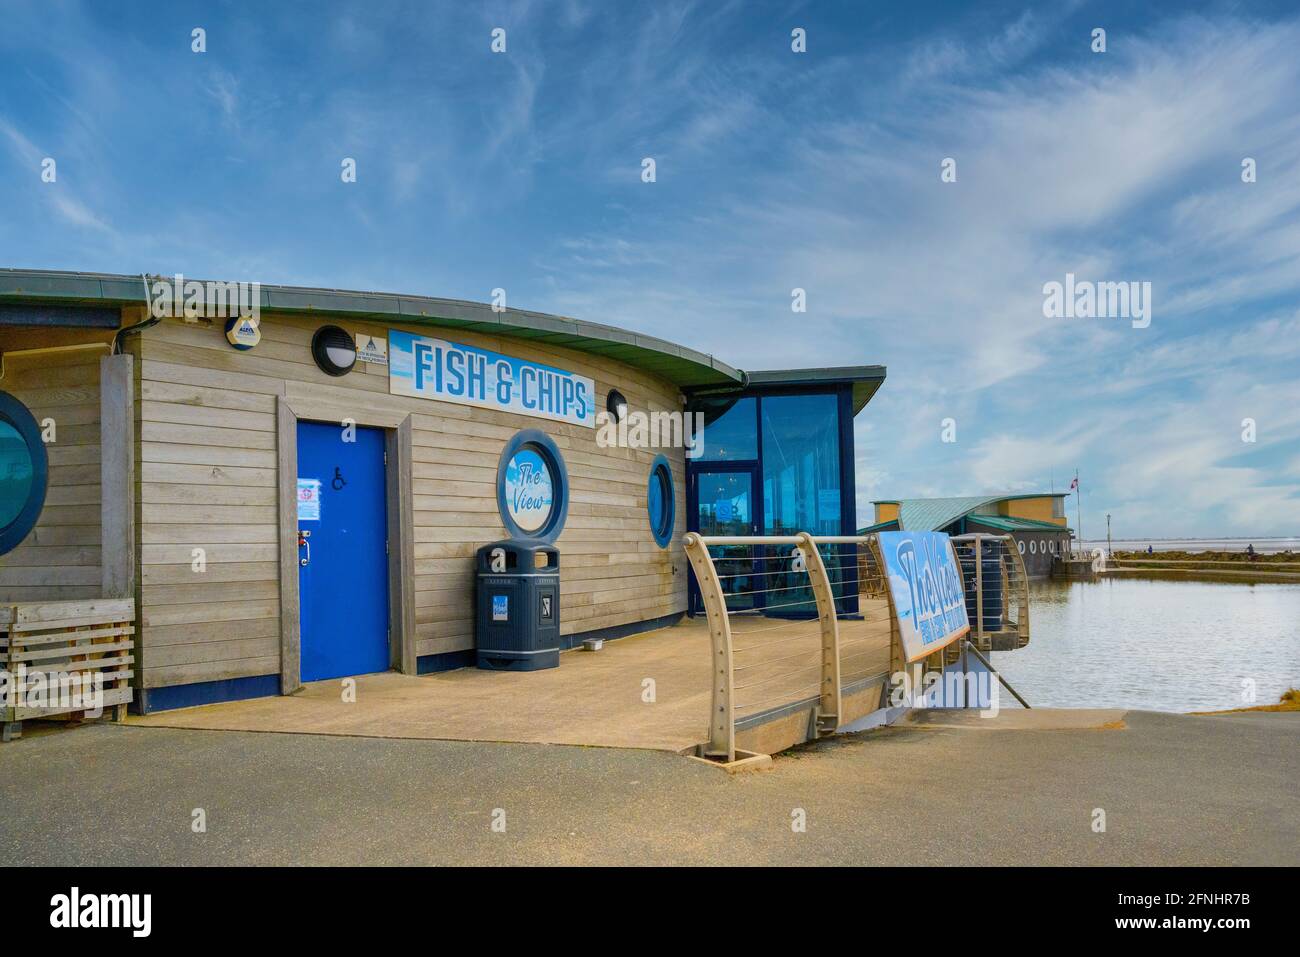 Stylish wood cladded Fish and Chip shop on the promenade at St Anne's, Lancashire, UK under a bright blue sky Stock Photo